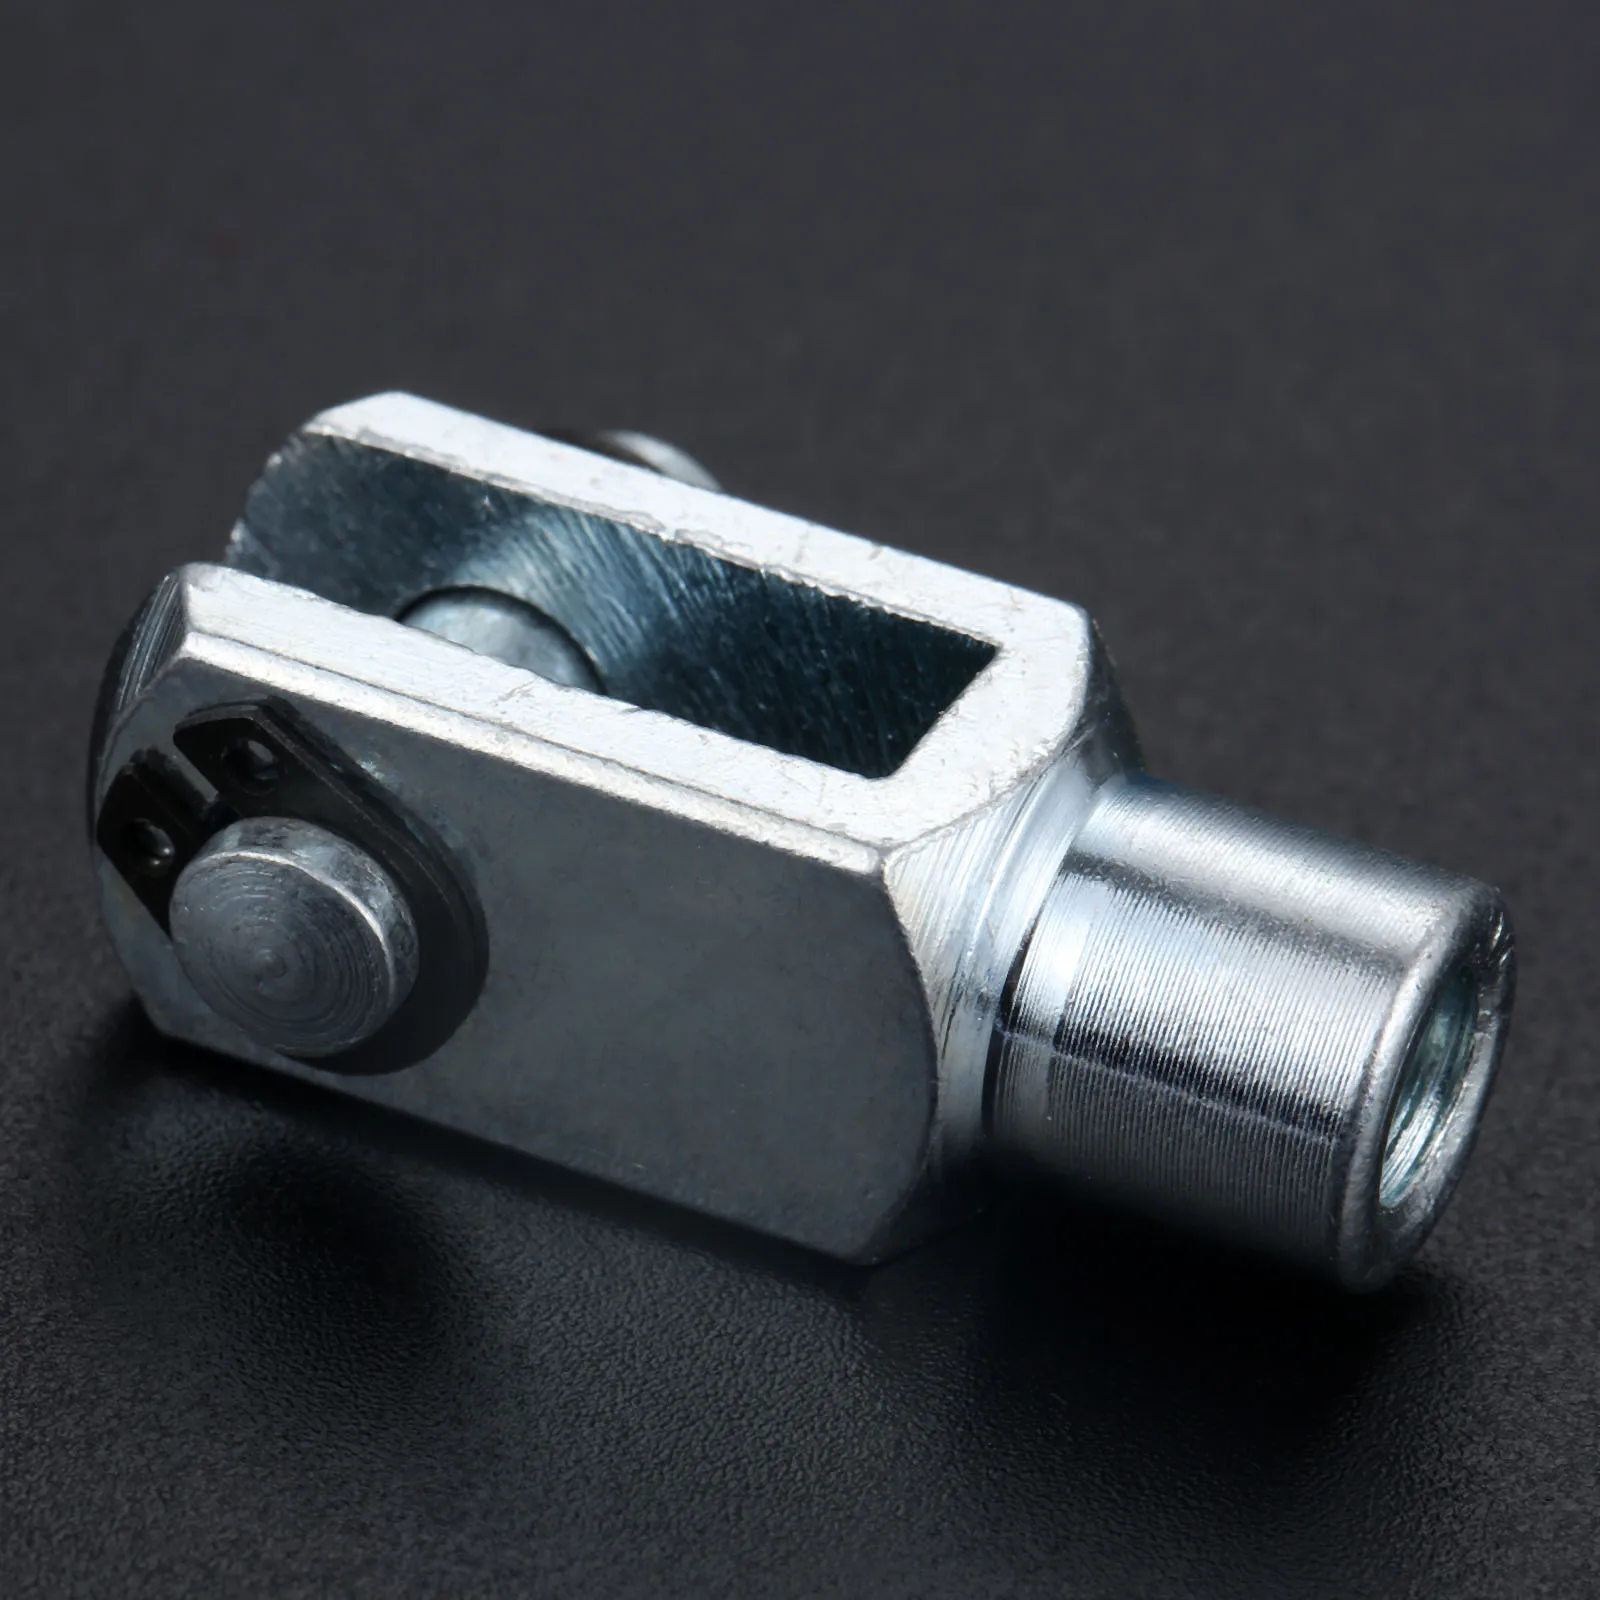 

1pc Y-16 M6*1 Thread Pneumatic Cylinder Rod Metal Piston Clevis Y Joint Part 16mm Bore Pneumatic Air Mechanical Linking Hardware